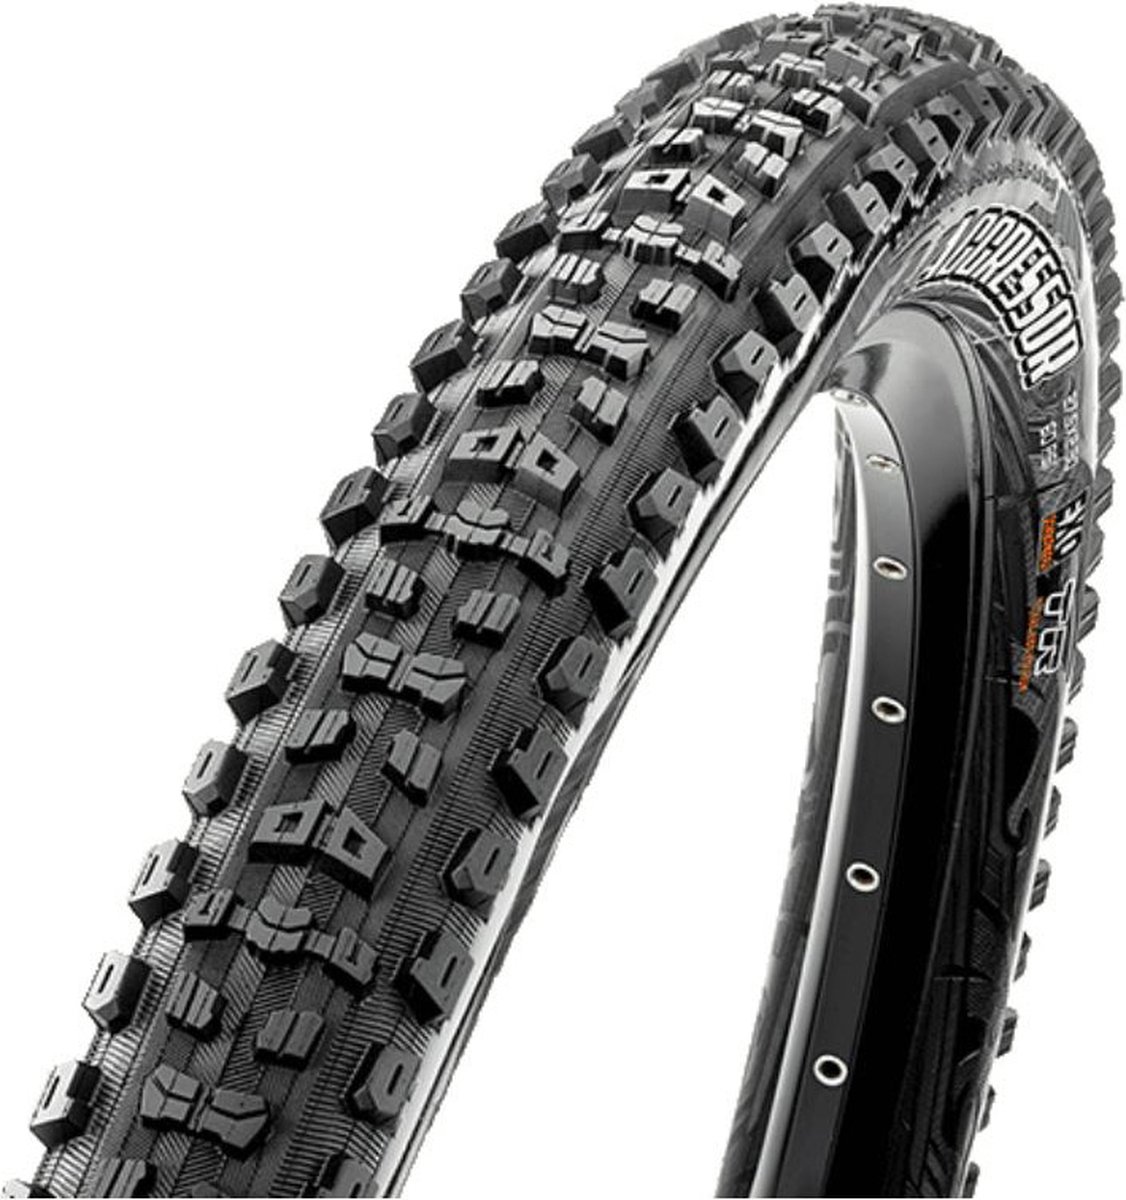 Maxxis Aggressor Vouwband 29x2.30